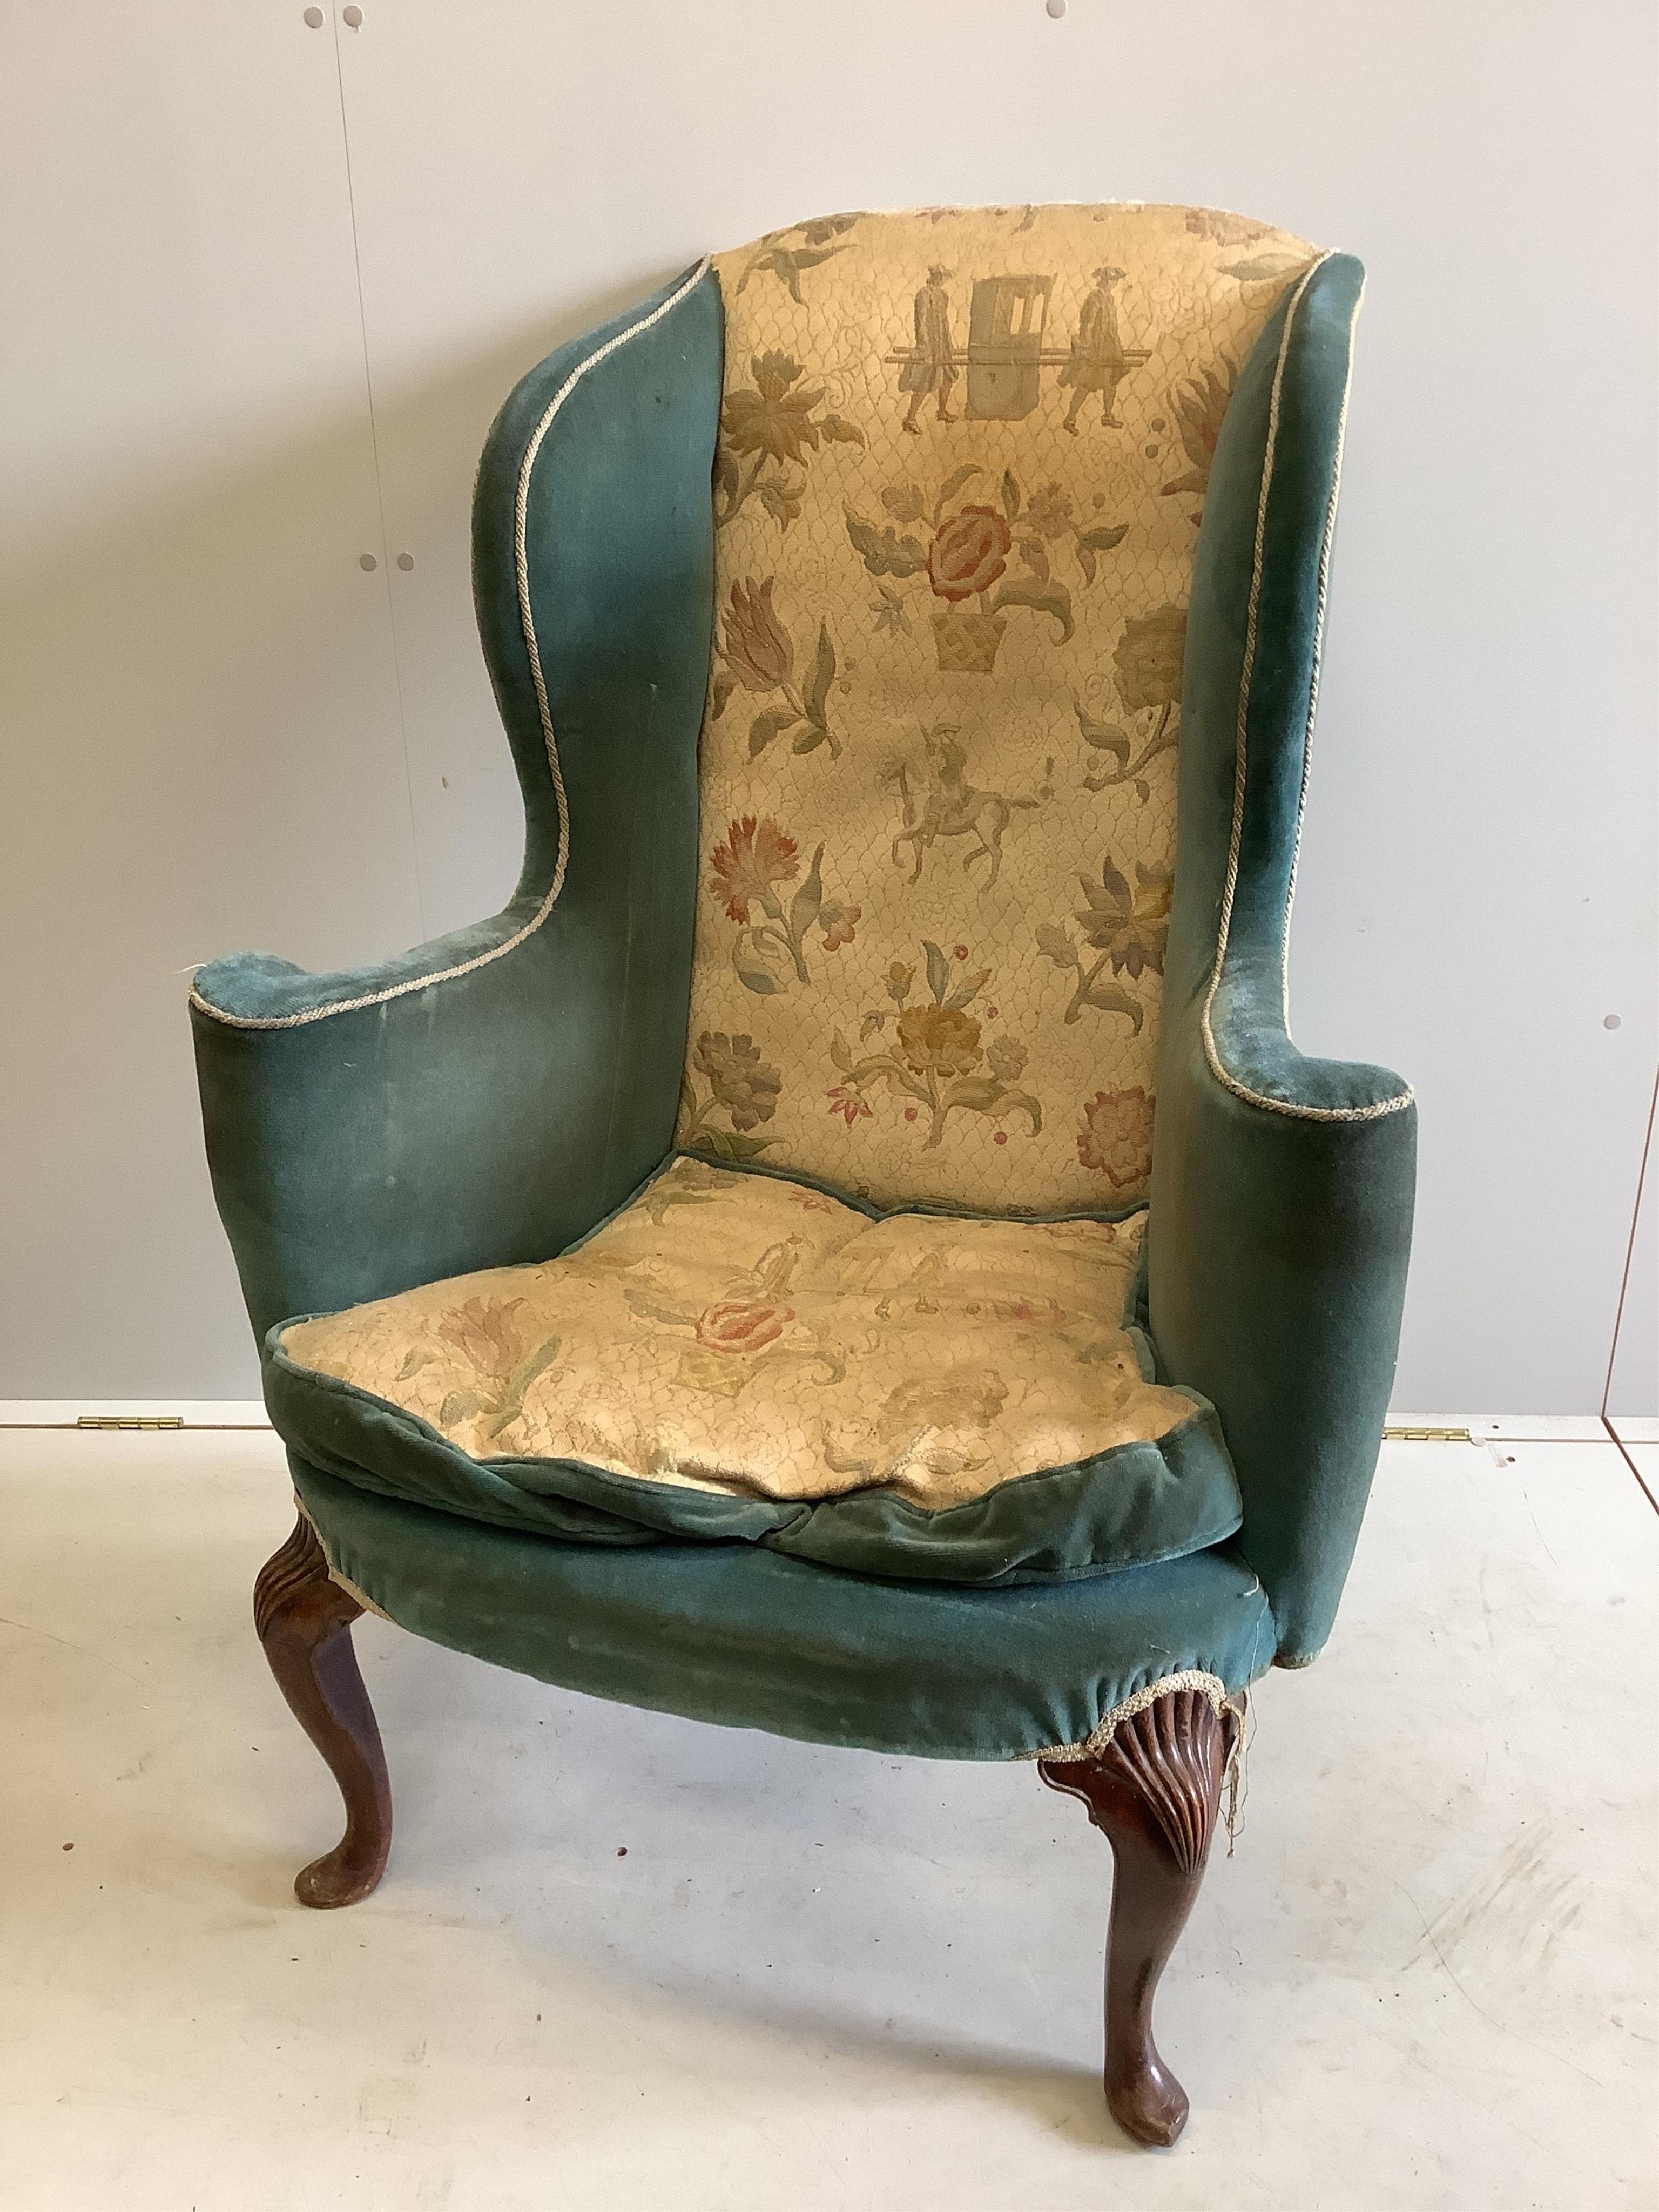 A 19th century Queen Anne style upholstered wing armchair, width 82cm, depth 60cm, height 116cm. Condition - fair